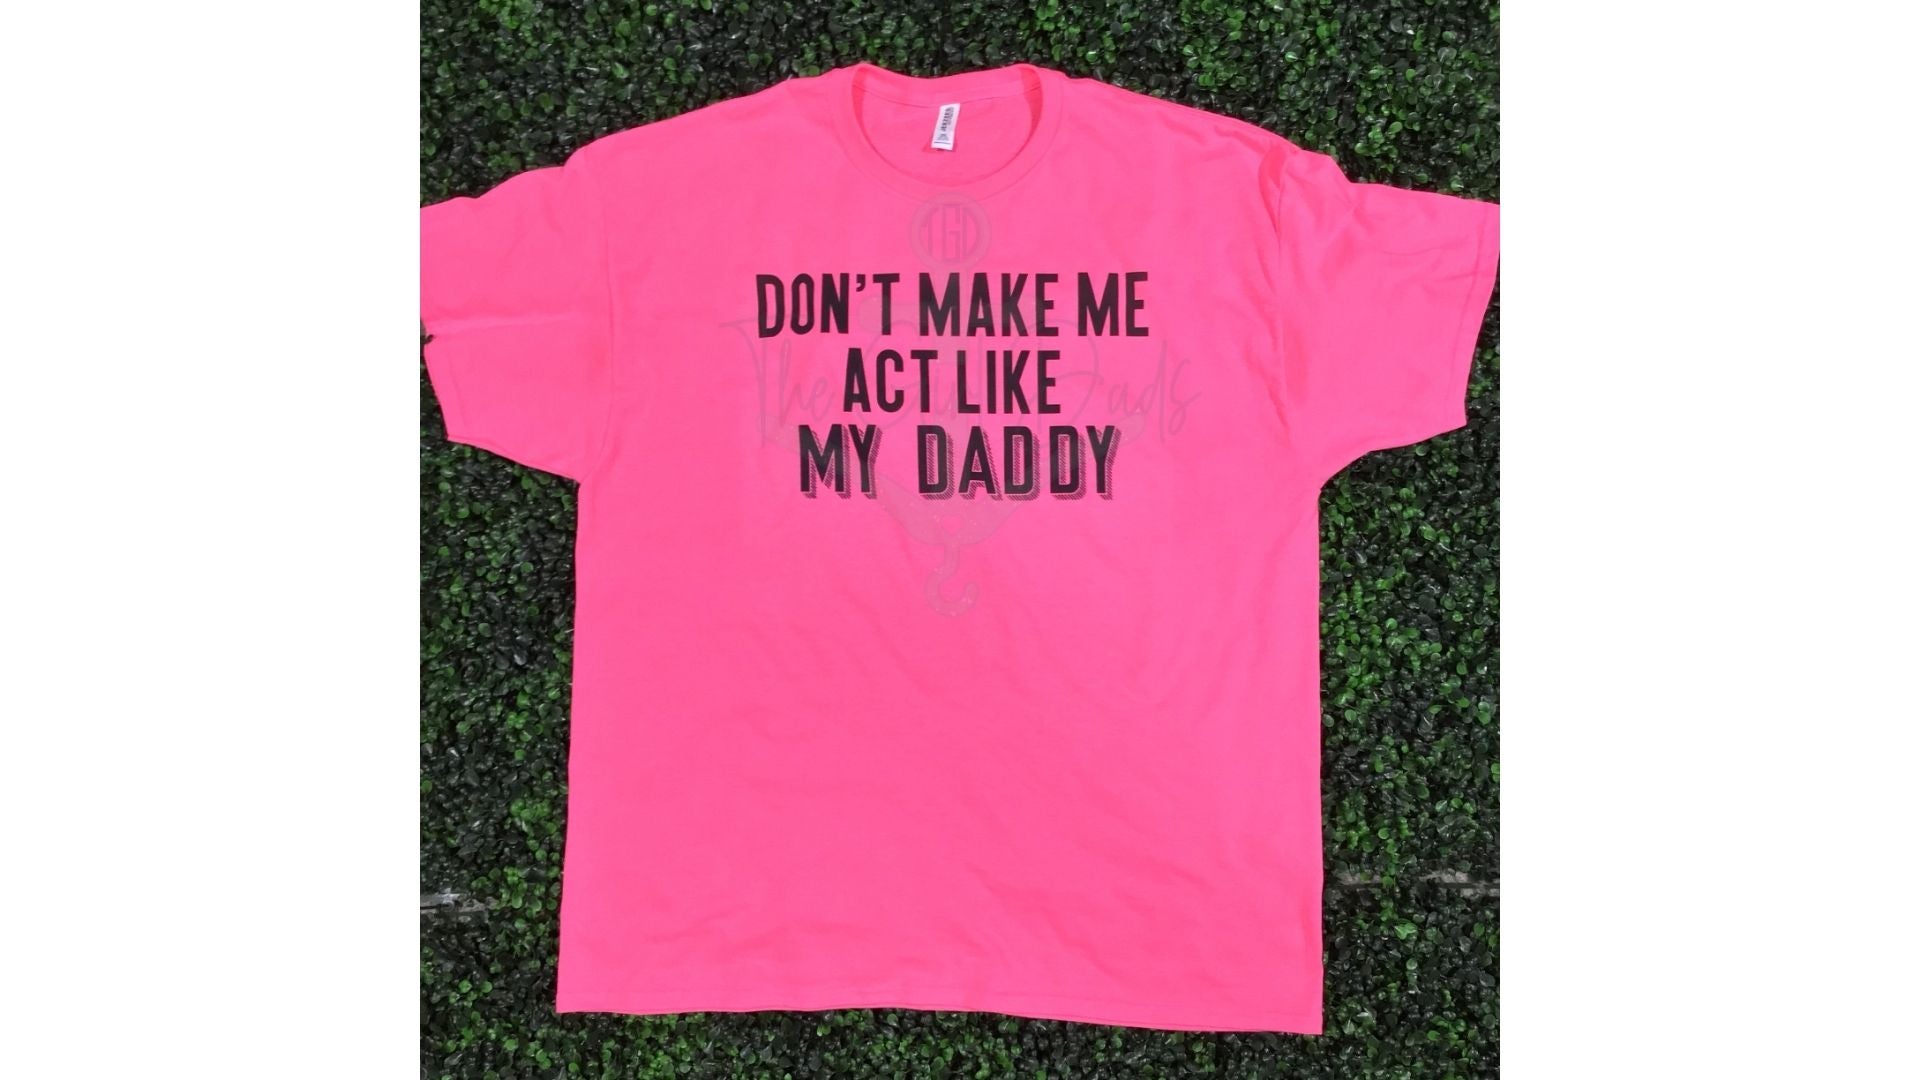 Act Like My Daddy Top Design